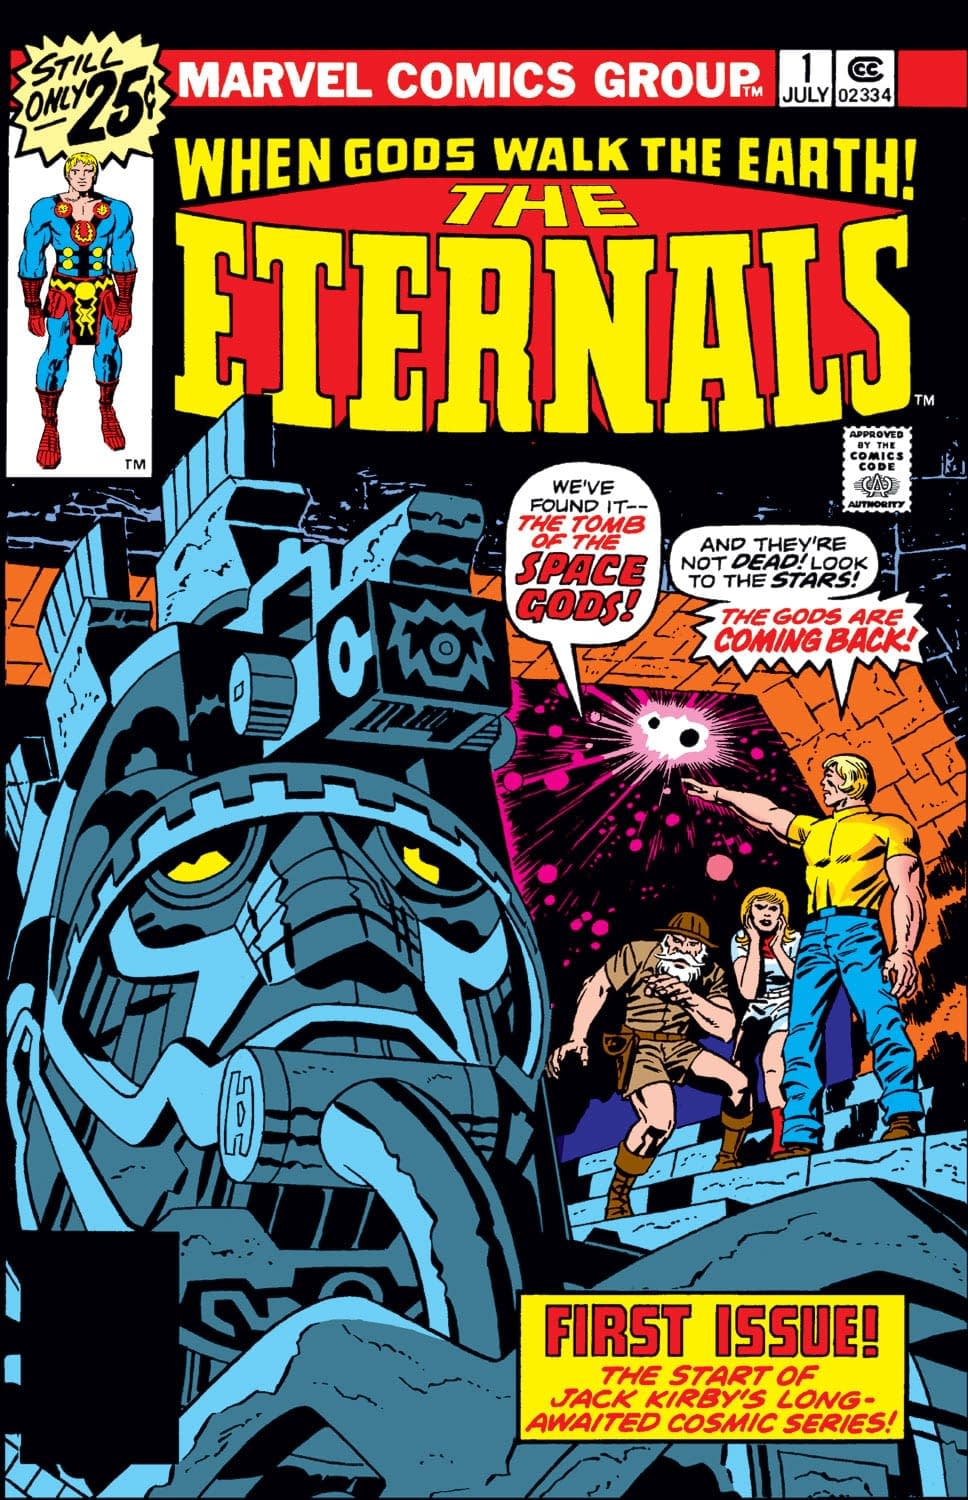 Kevin Feige Says The Eternals Will be "Immense, Amazing" and "Epic"